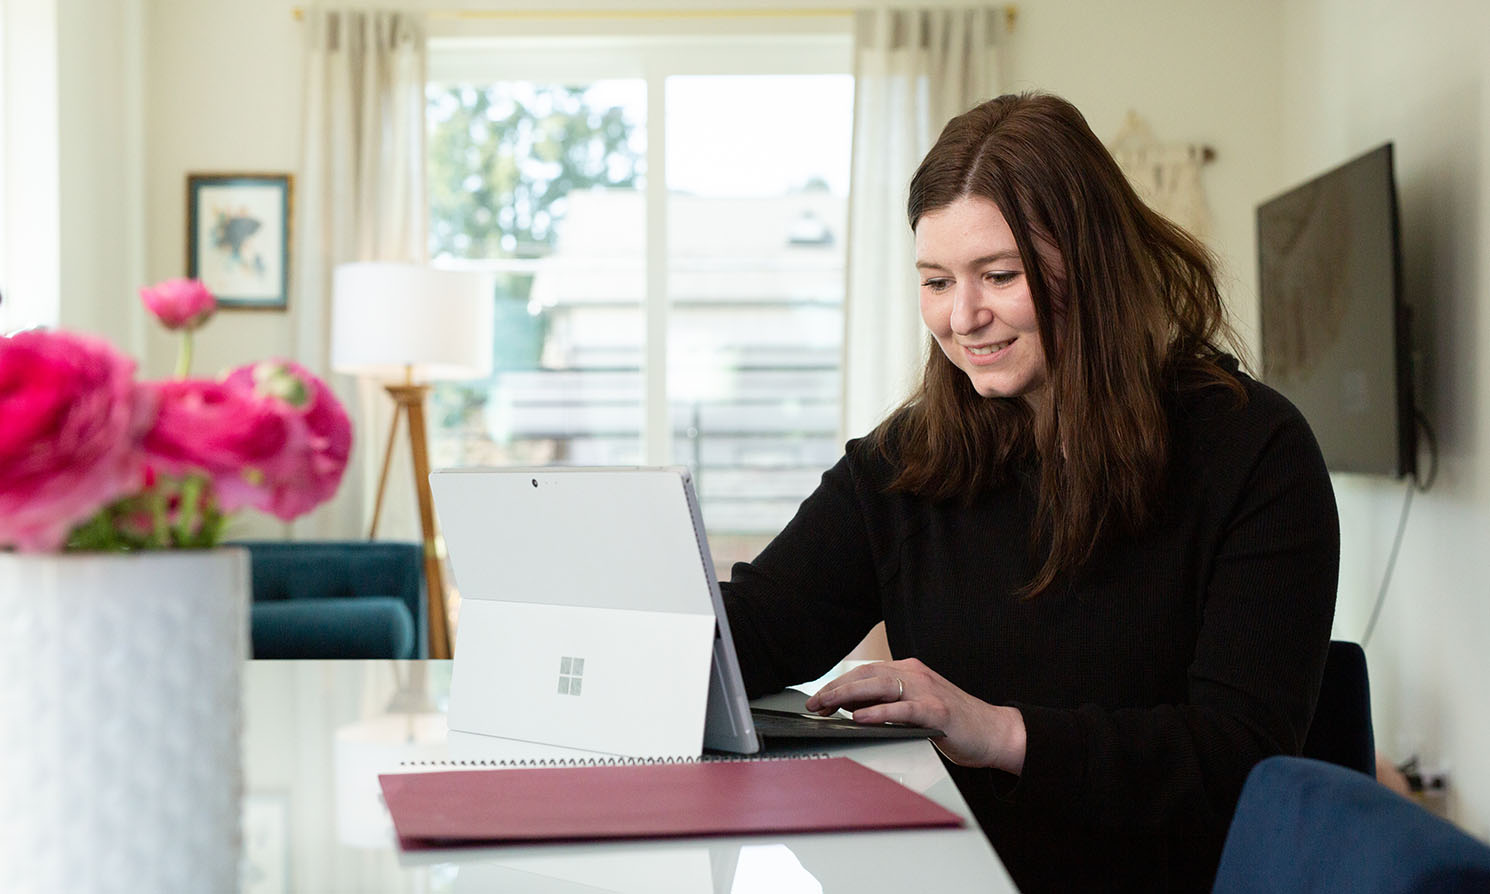 An MBA student works on her laptop at home | photo by Chris Baron